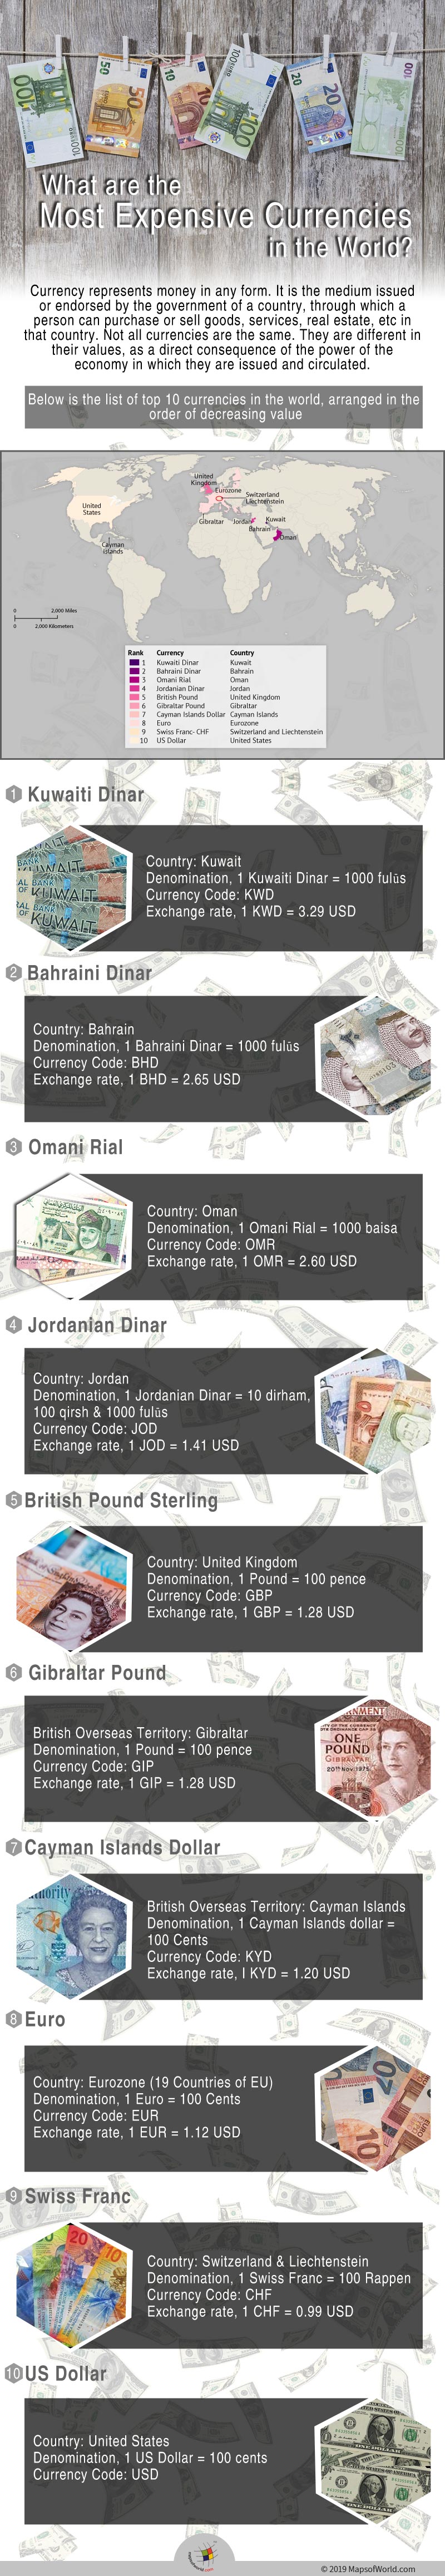 Infographic Giving Details on the Most Expensive Currencies in the World